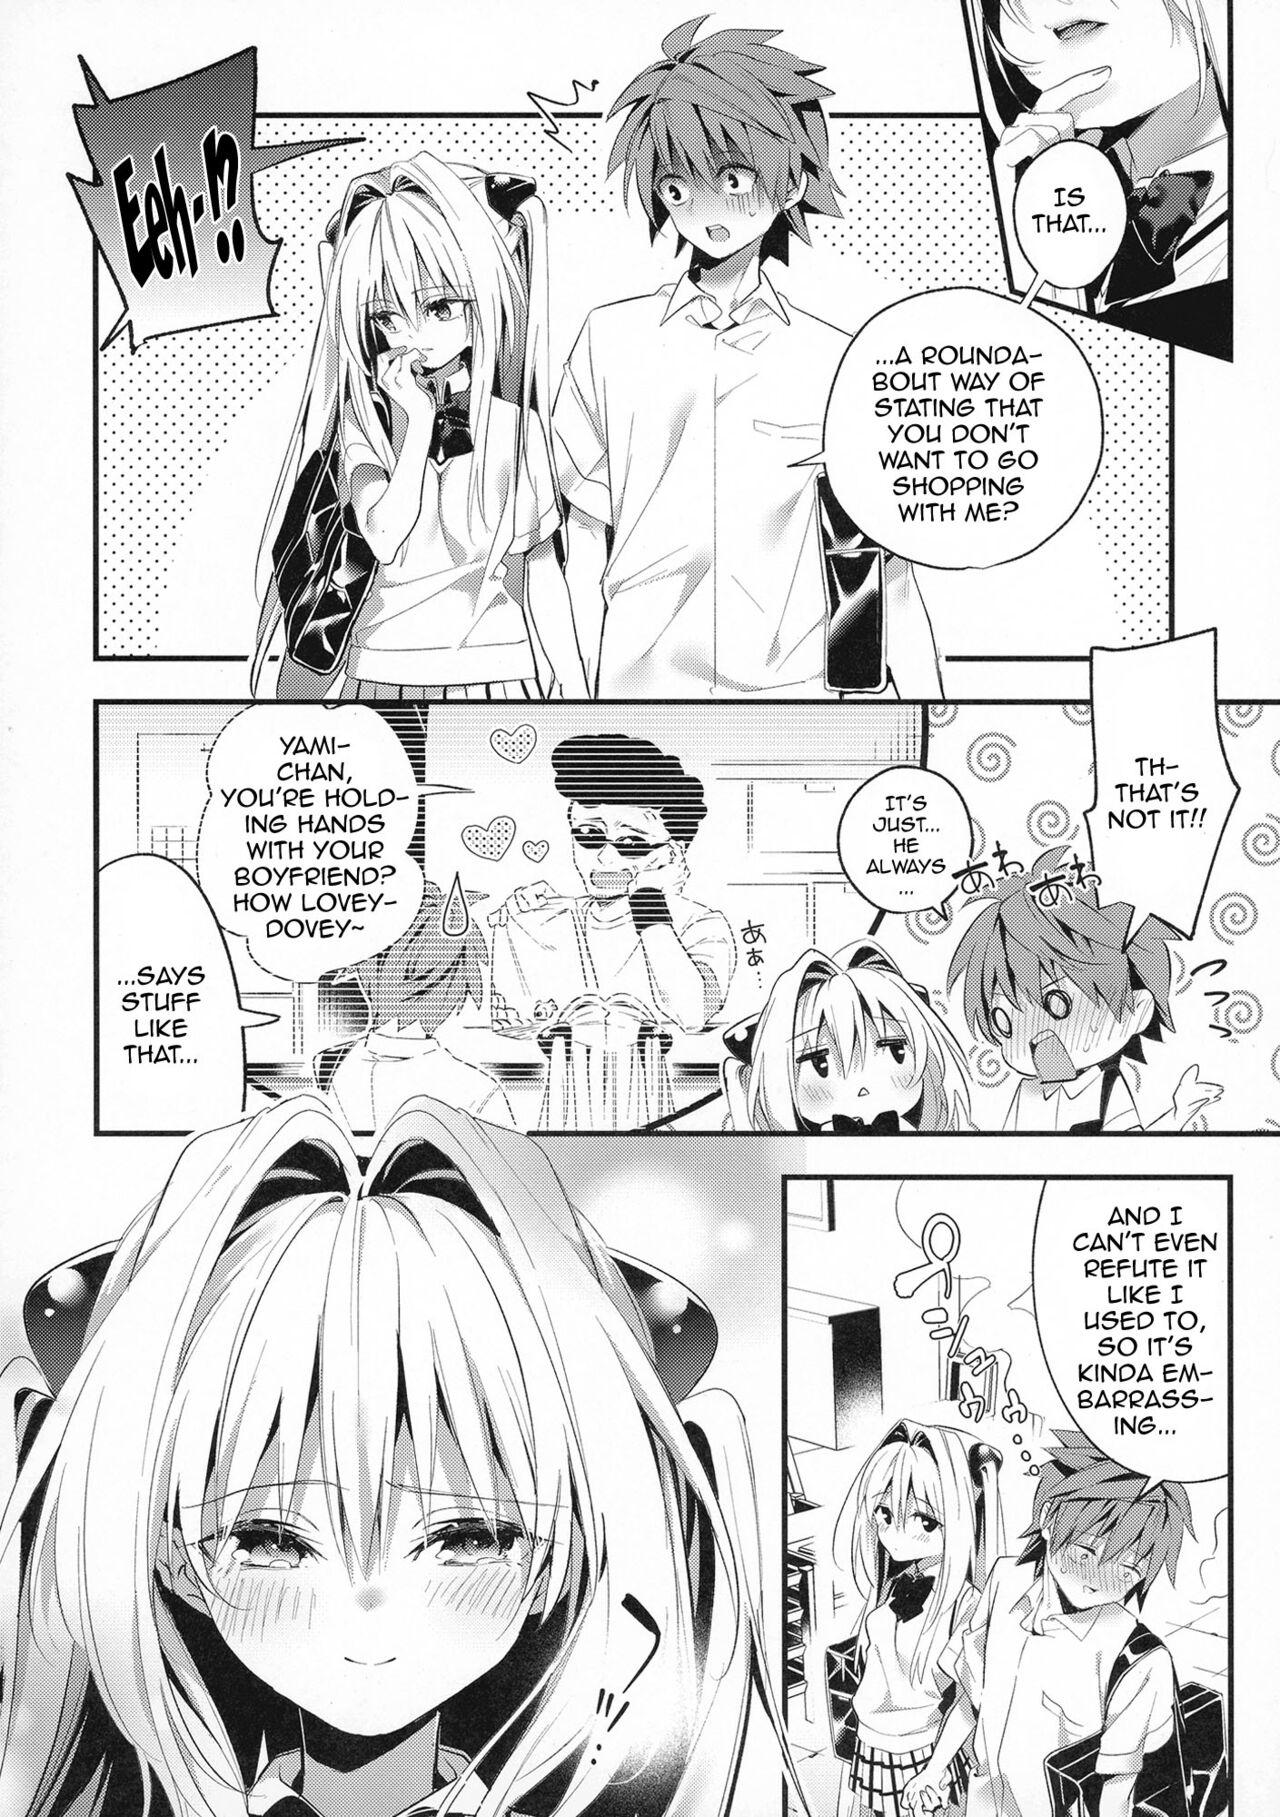 Asians Hajimete Namae de. - Call by name for the first time - To love-ru Best Blow Job - Page 5